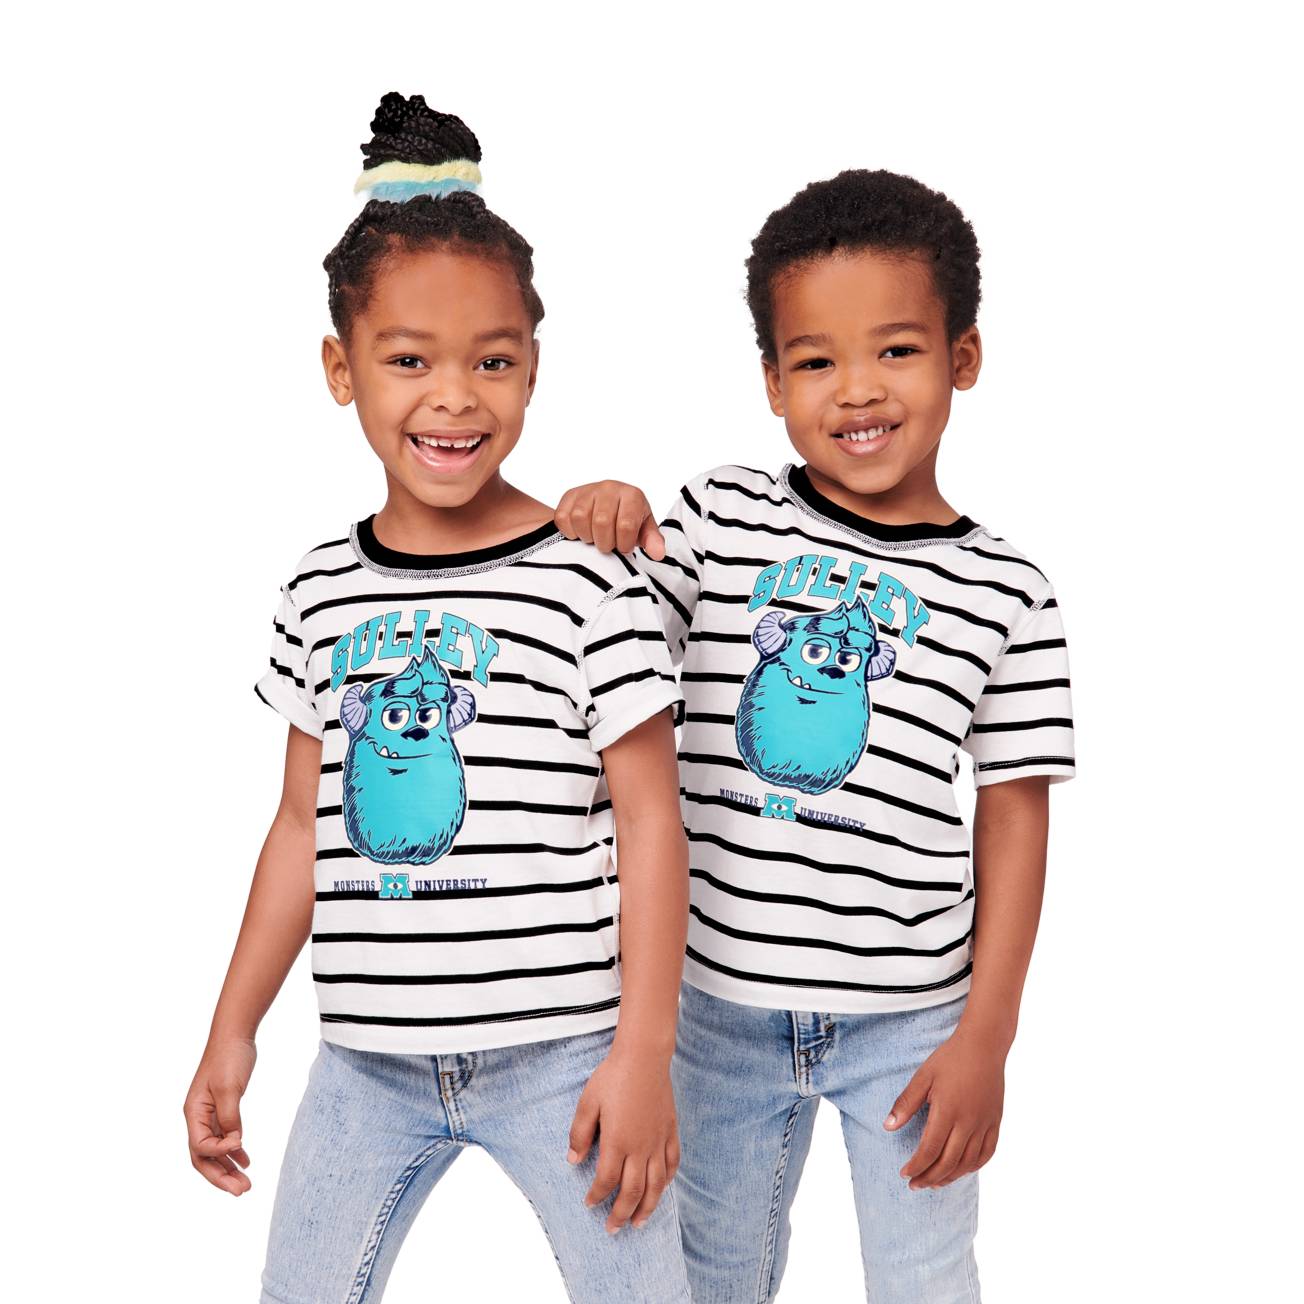 shopDisney Sale: Up to 70% off + Buy 2, Get 1 Free